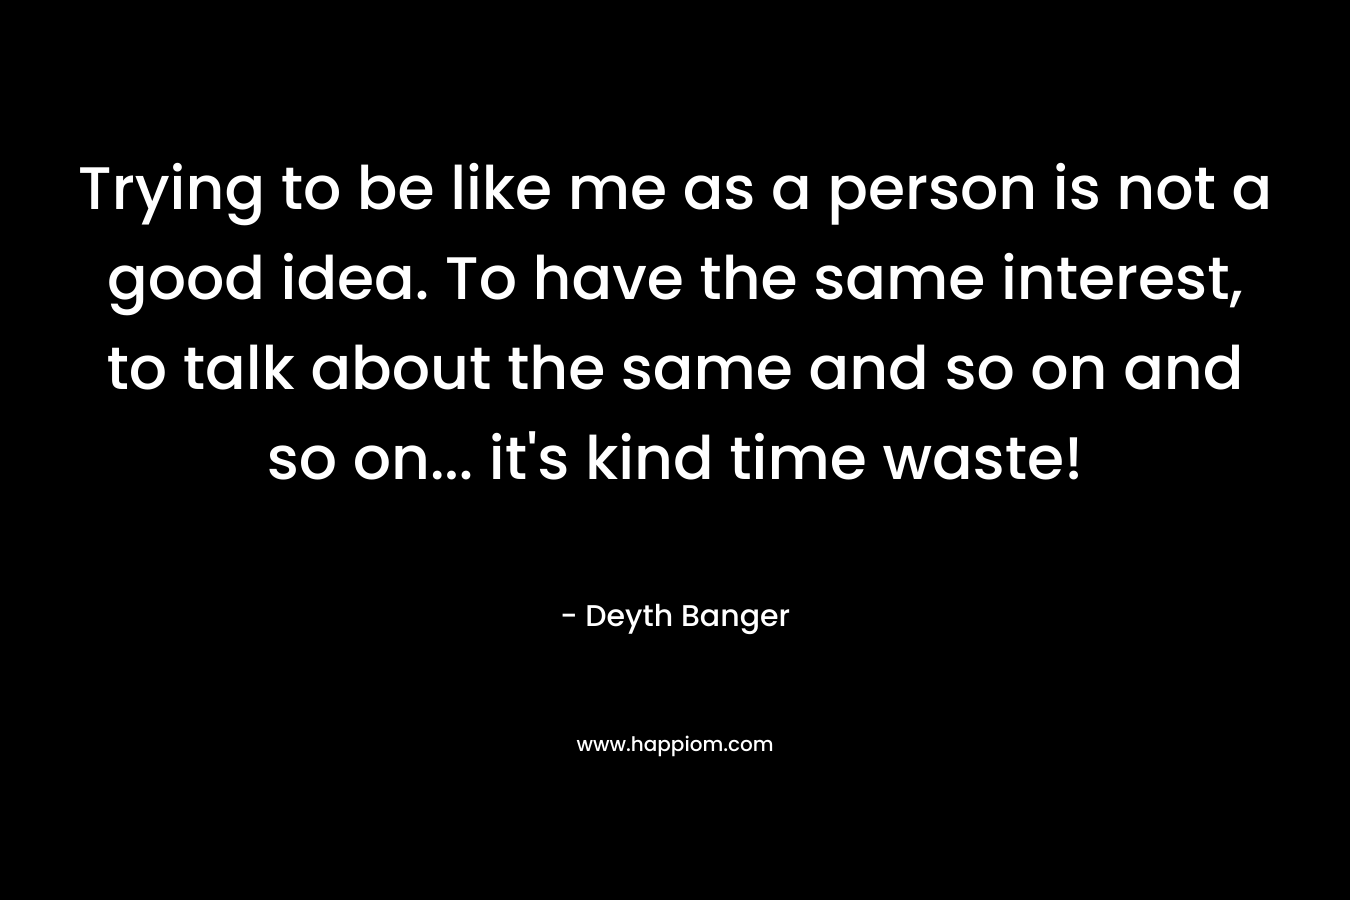 Trying to be like me as a person is not a good idea. To have the same interest, to talk about the same and so on and so on… it’s kind time waste! – Deyth Banger